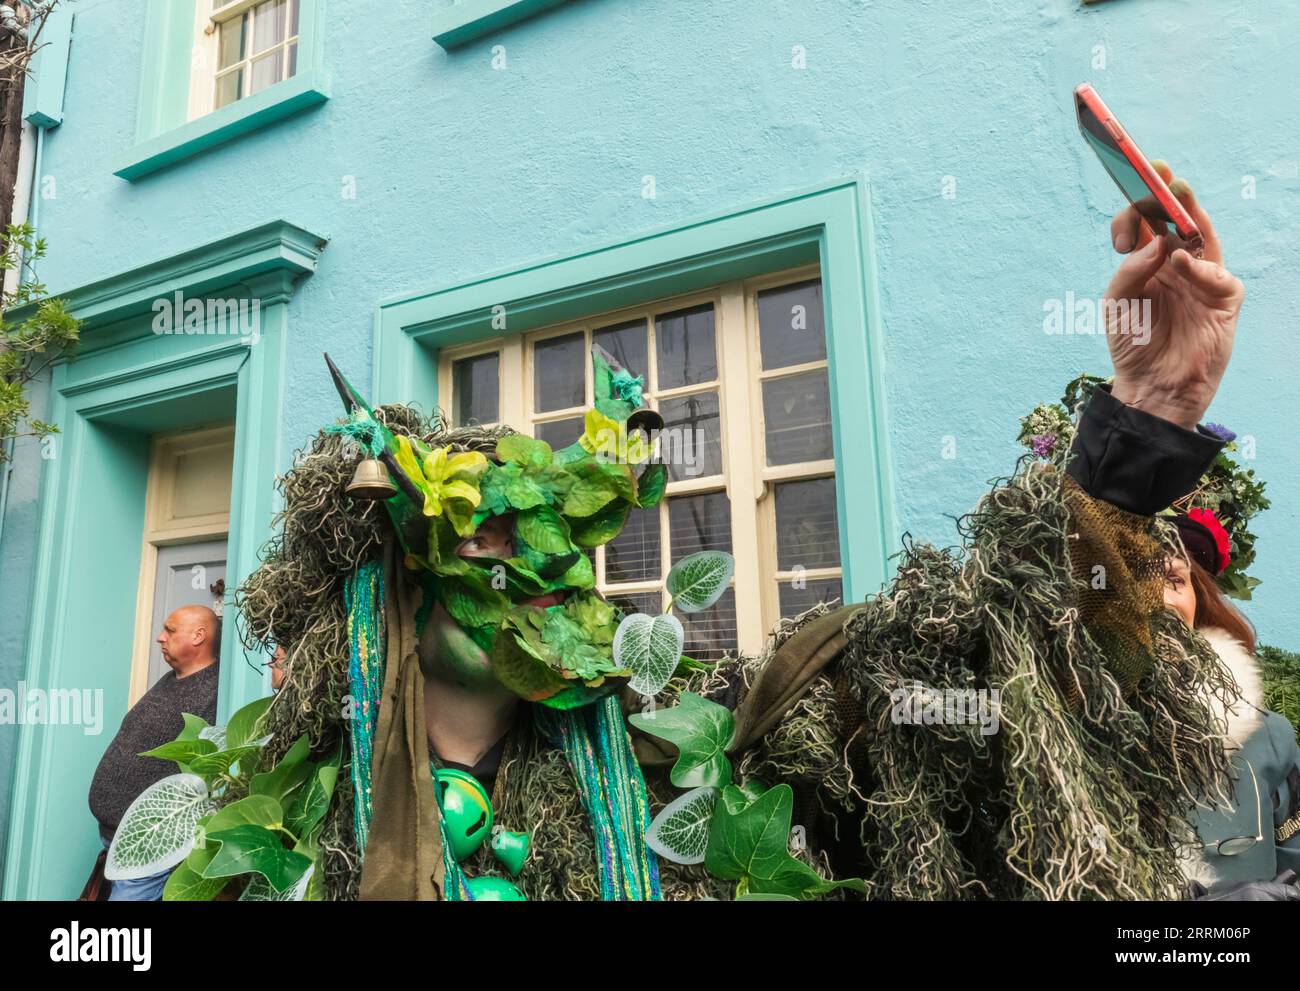 England, Sussex, East Sussex, Hastings, The Old Town, Participants in The Annual Jack in The Green Festival Stock Photo